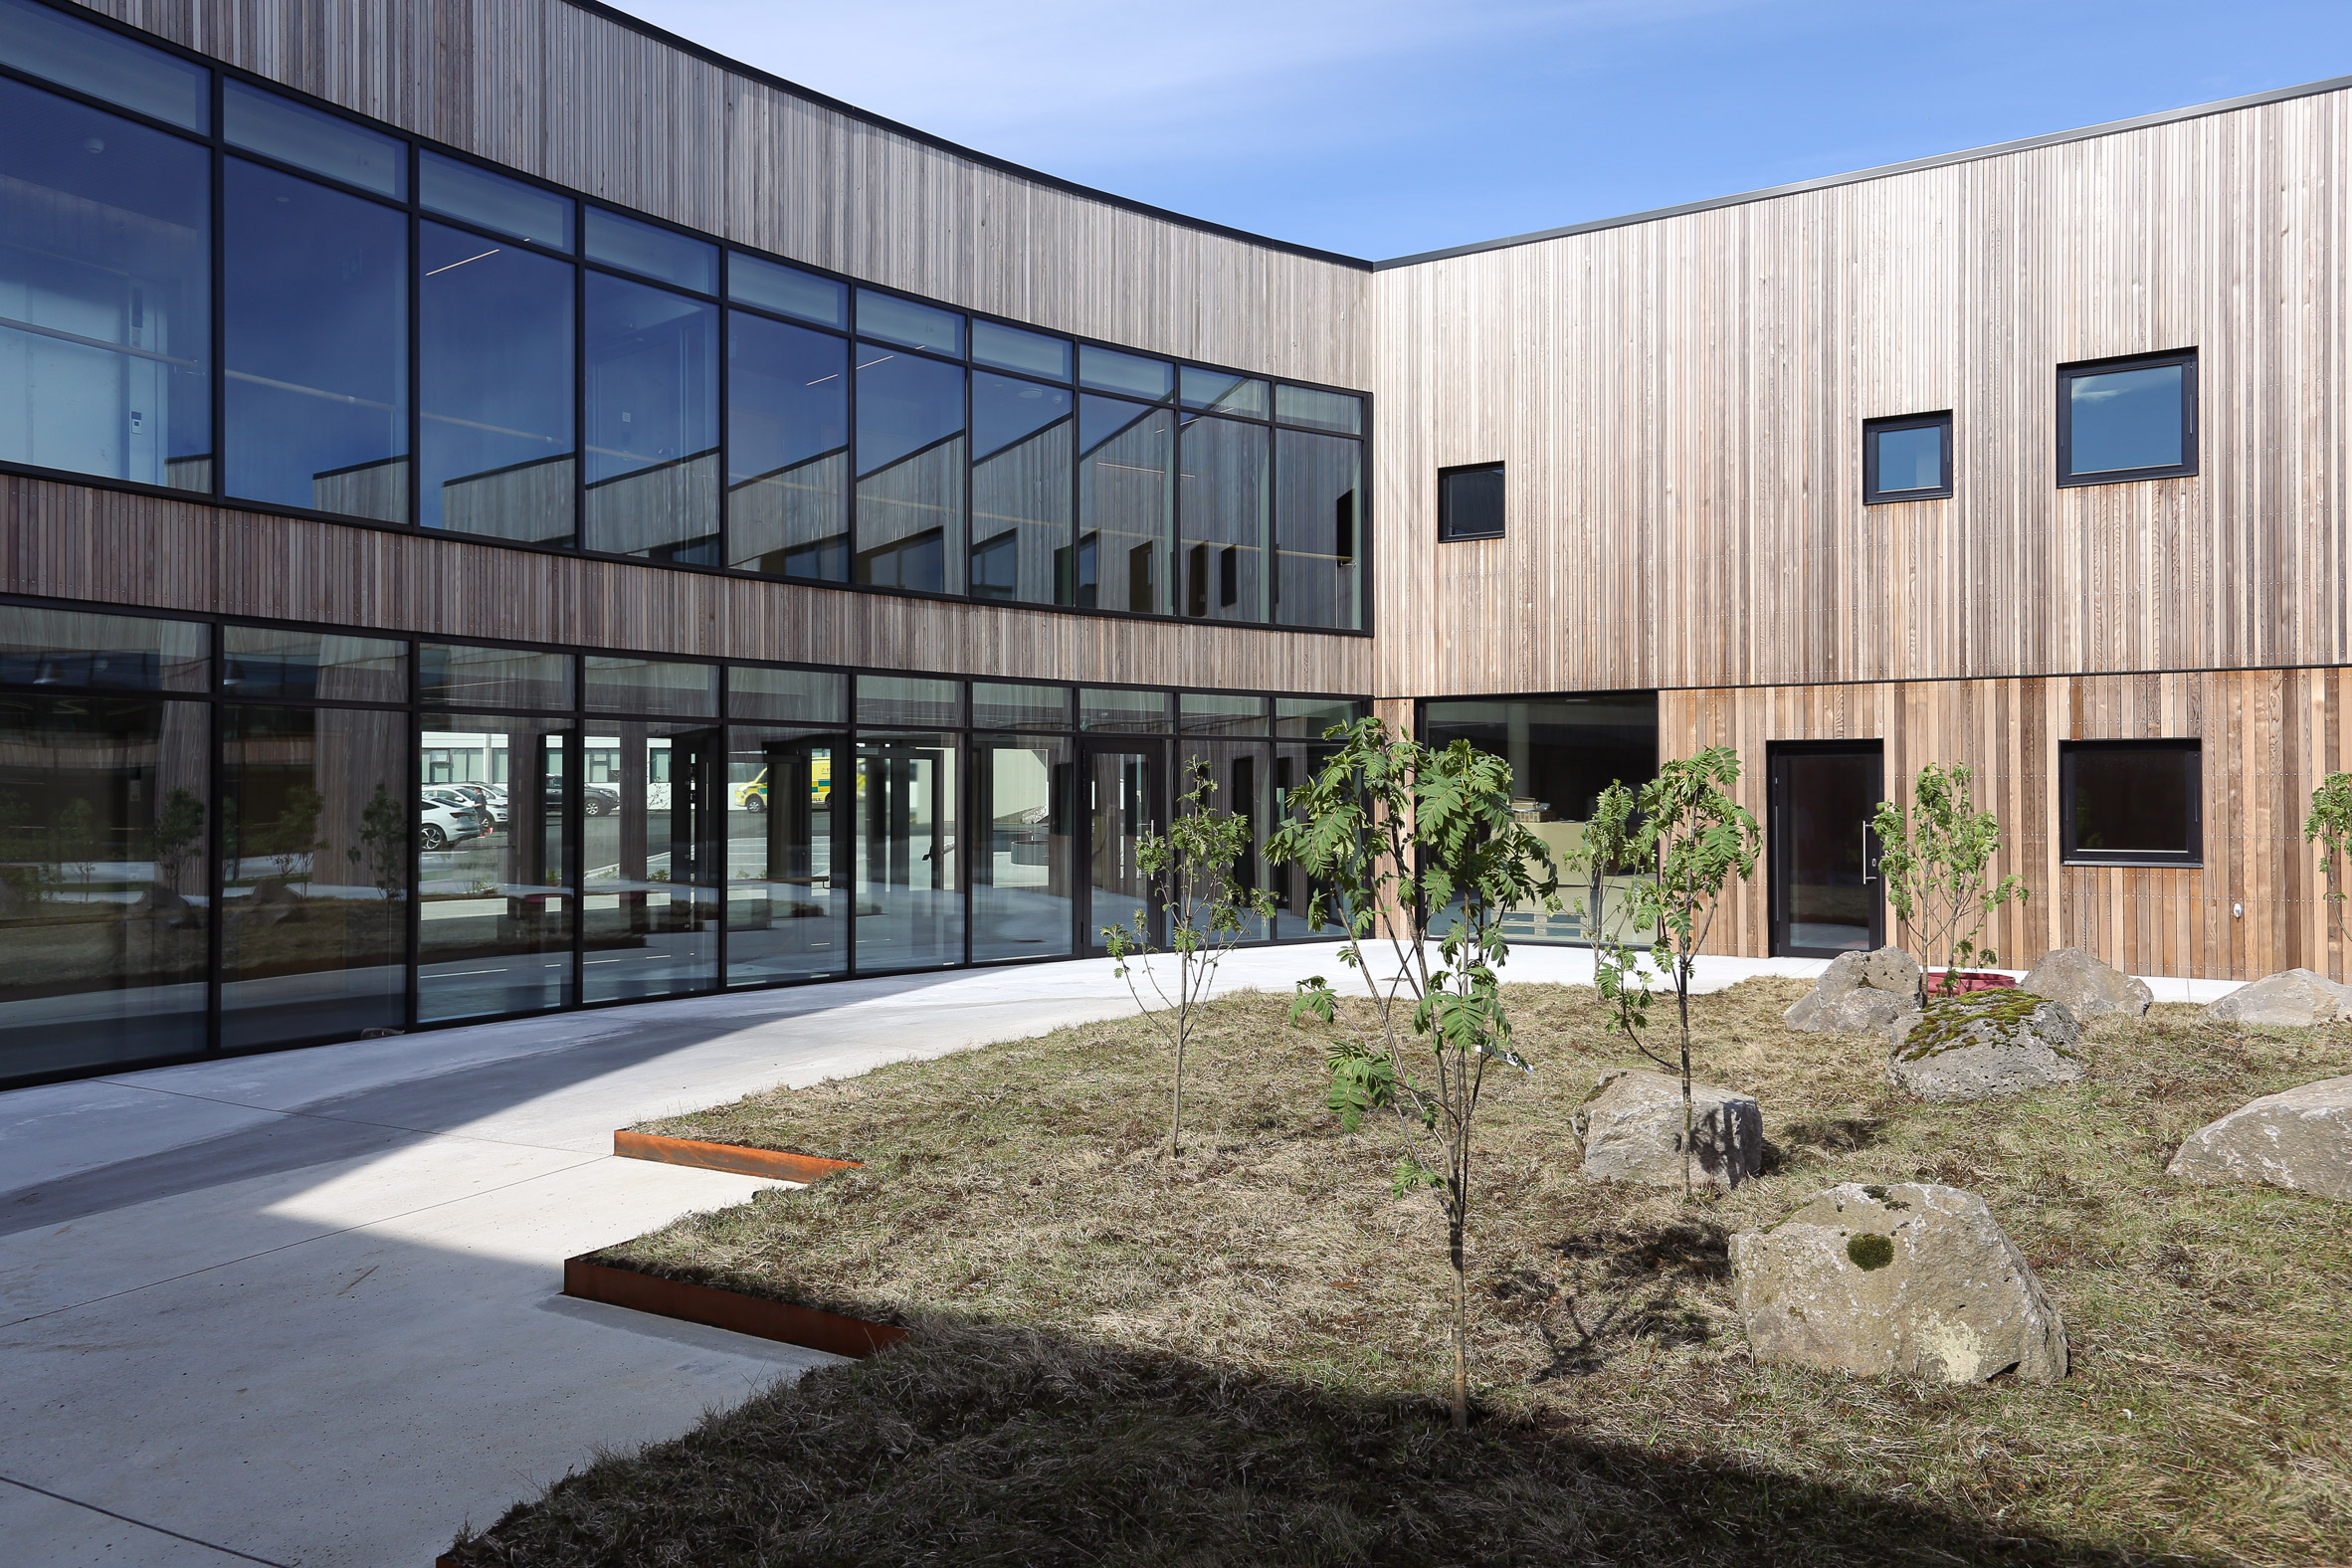 Wooden cladding of the care home in Iceland